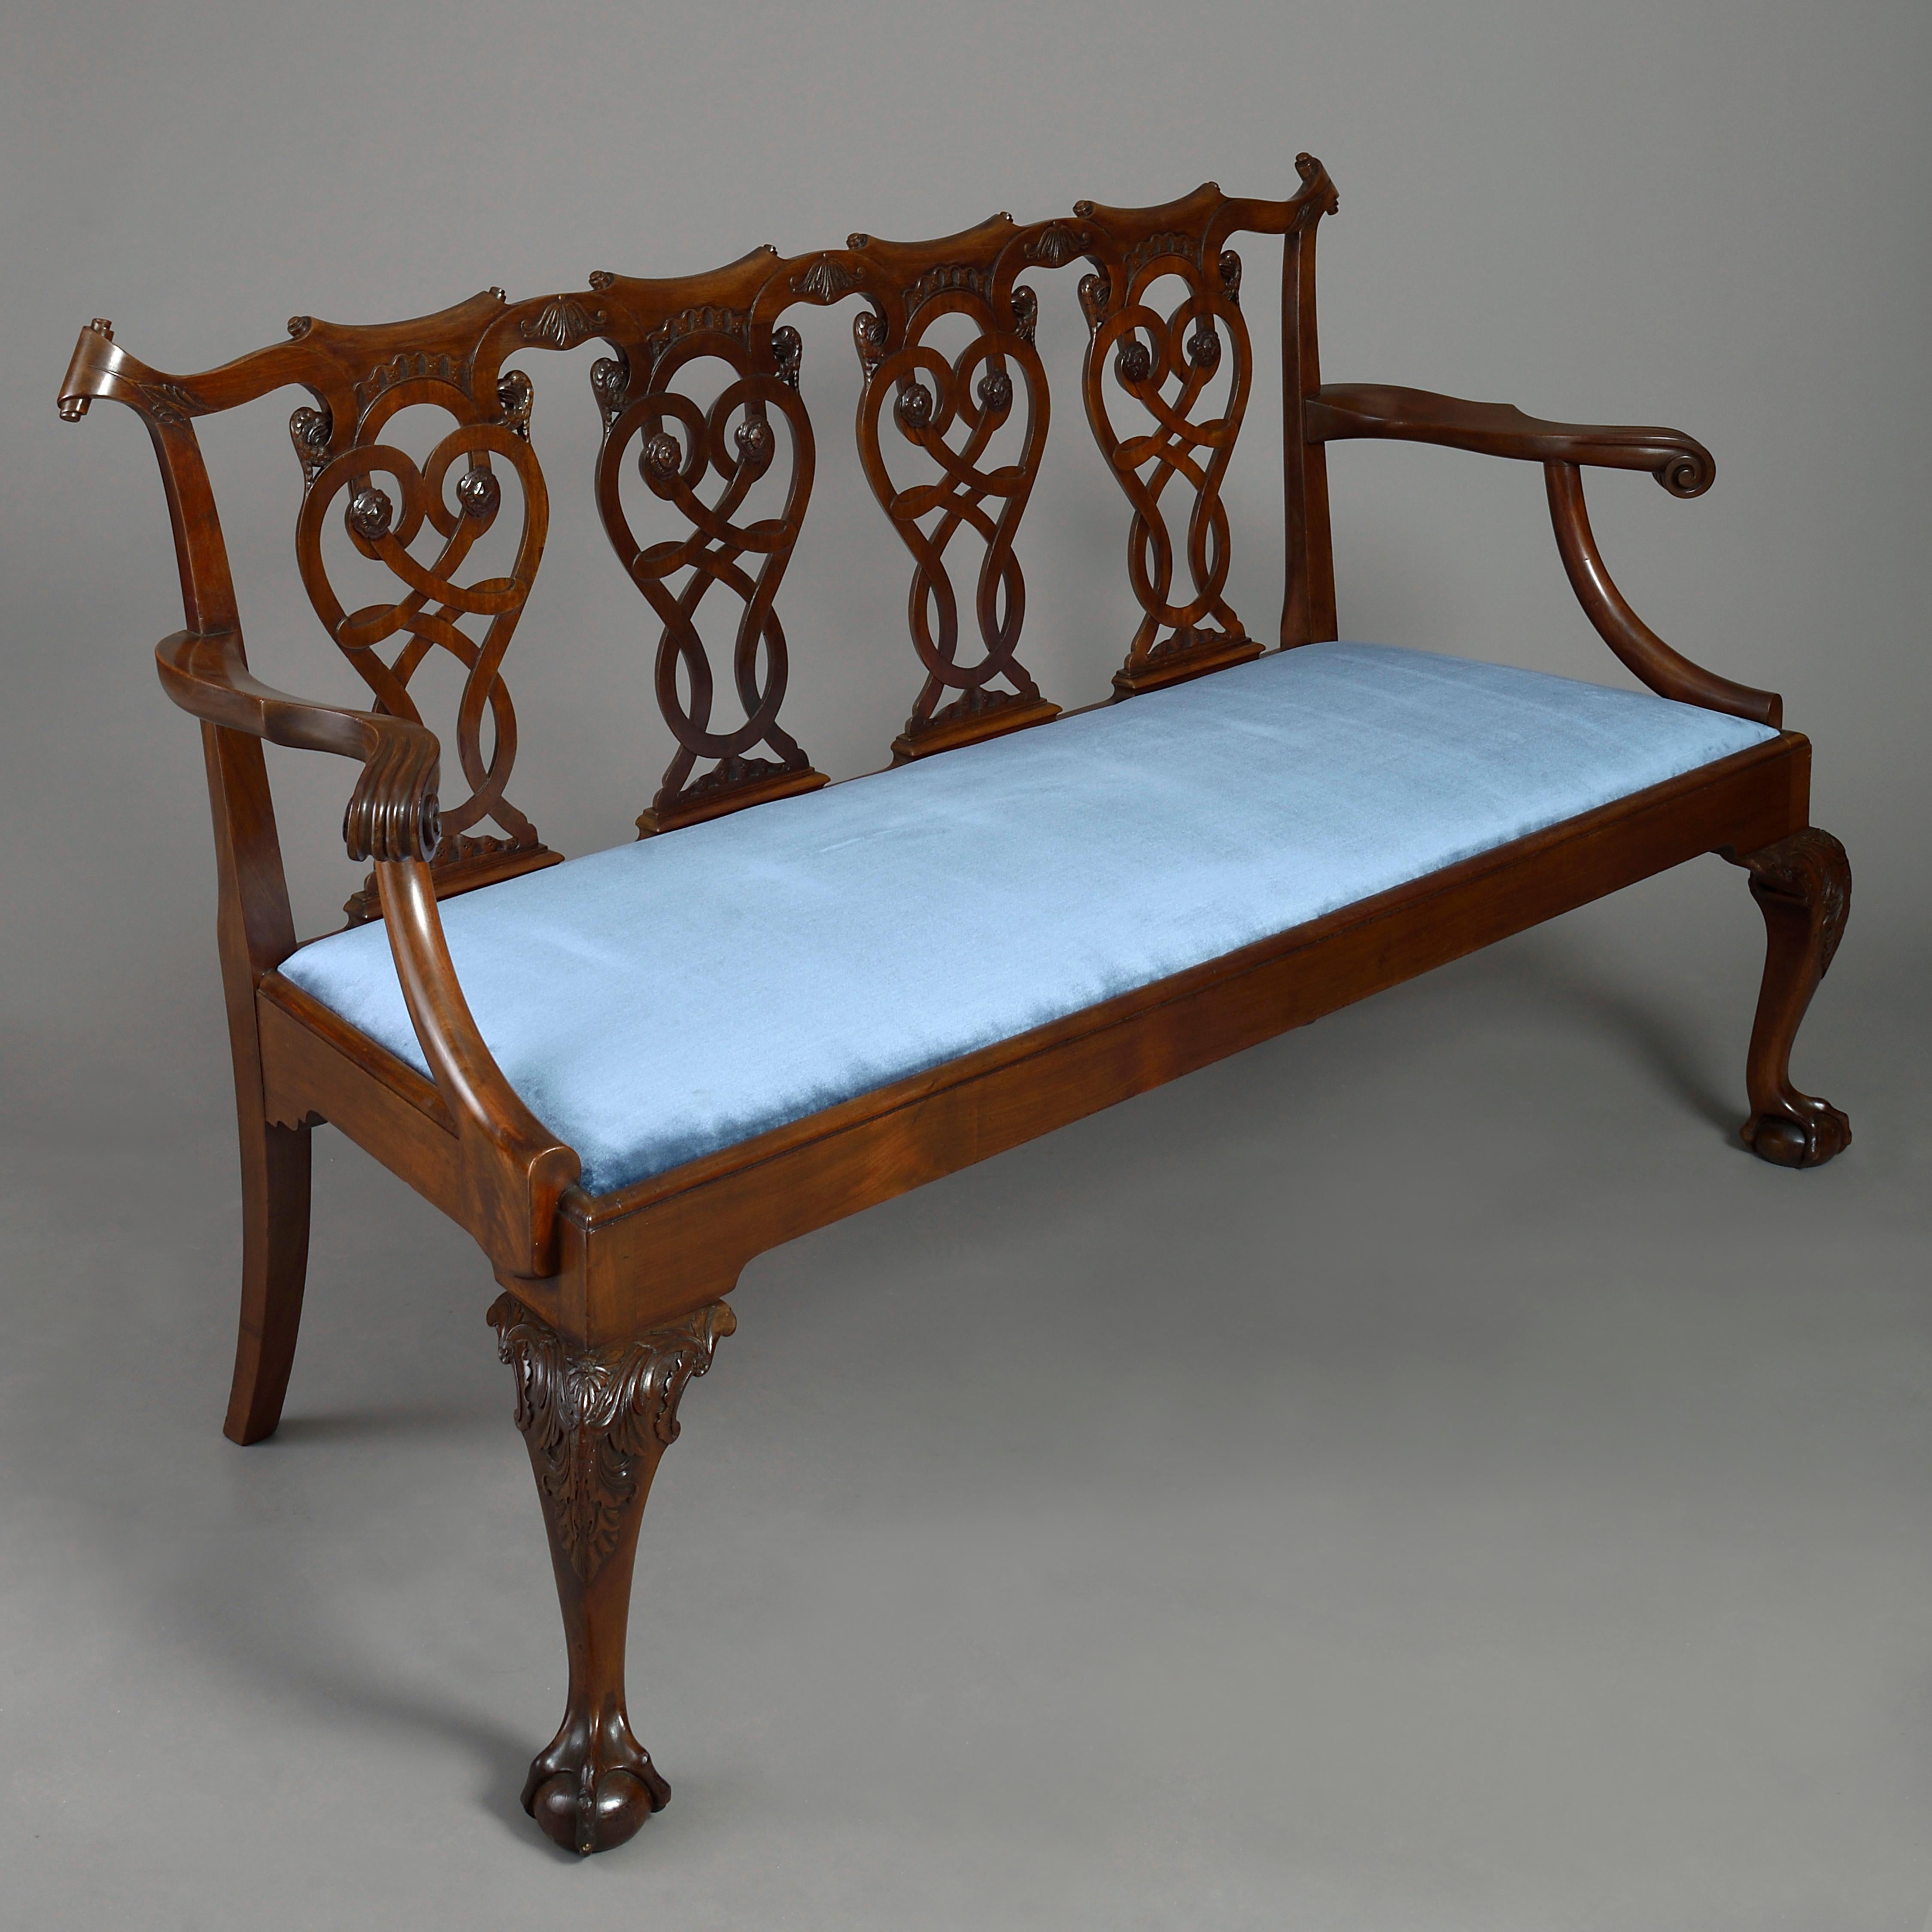 A fine late 19th century mahogany settee in the Irish George III manner, the quadruple pierced splat back with carved scrollwork, eagle heads, rocailles, and rosettes, the scrolling arms set upon a frame with drop-in seat, all raised on acanthus